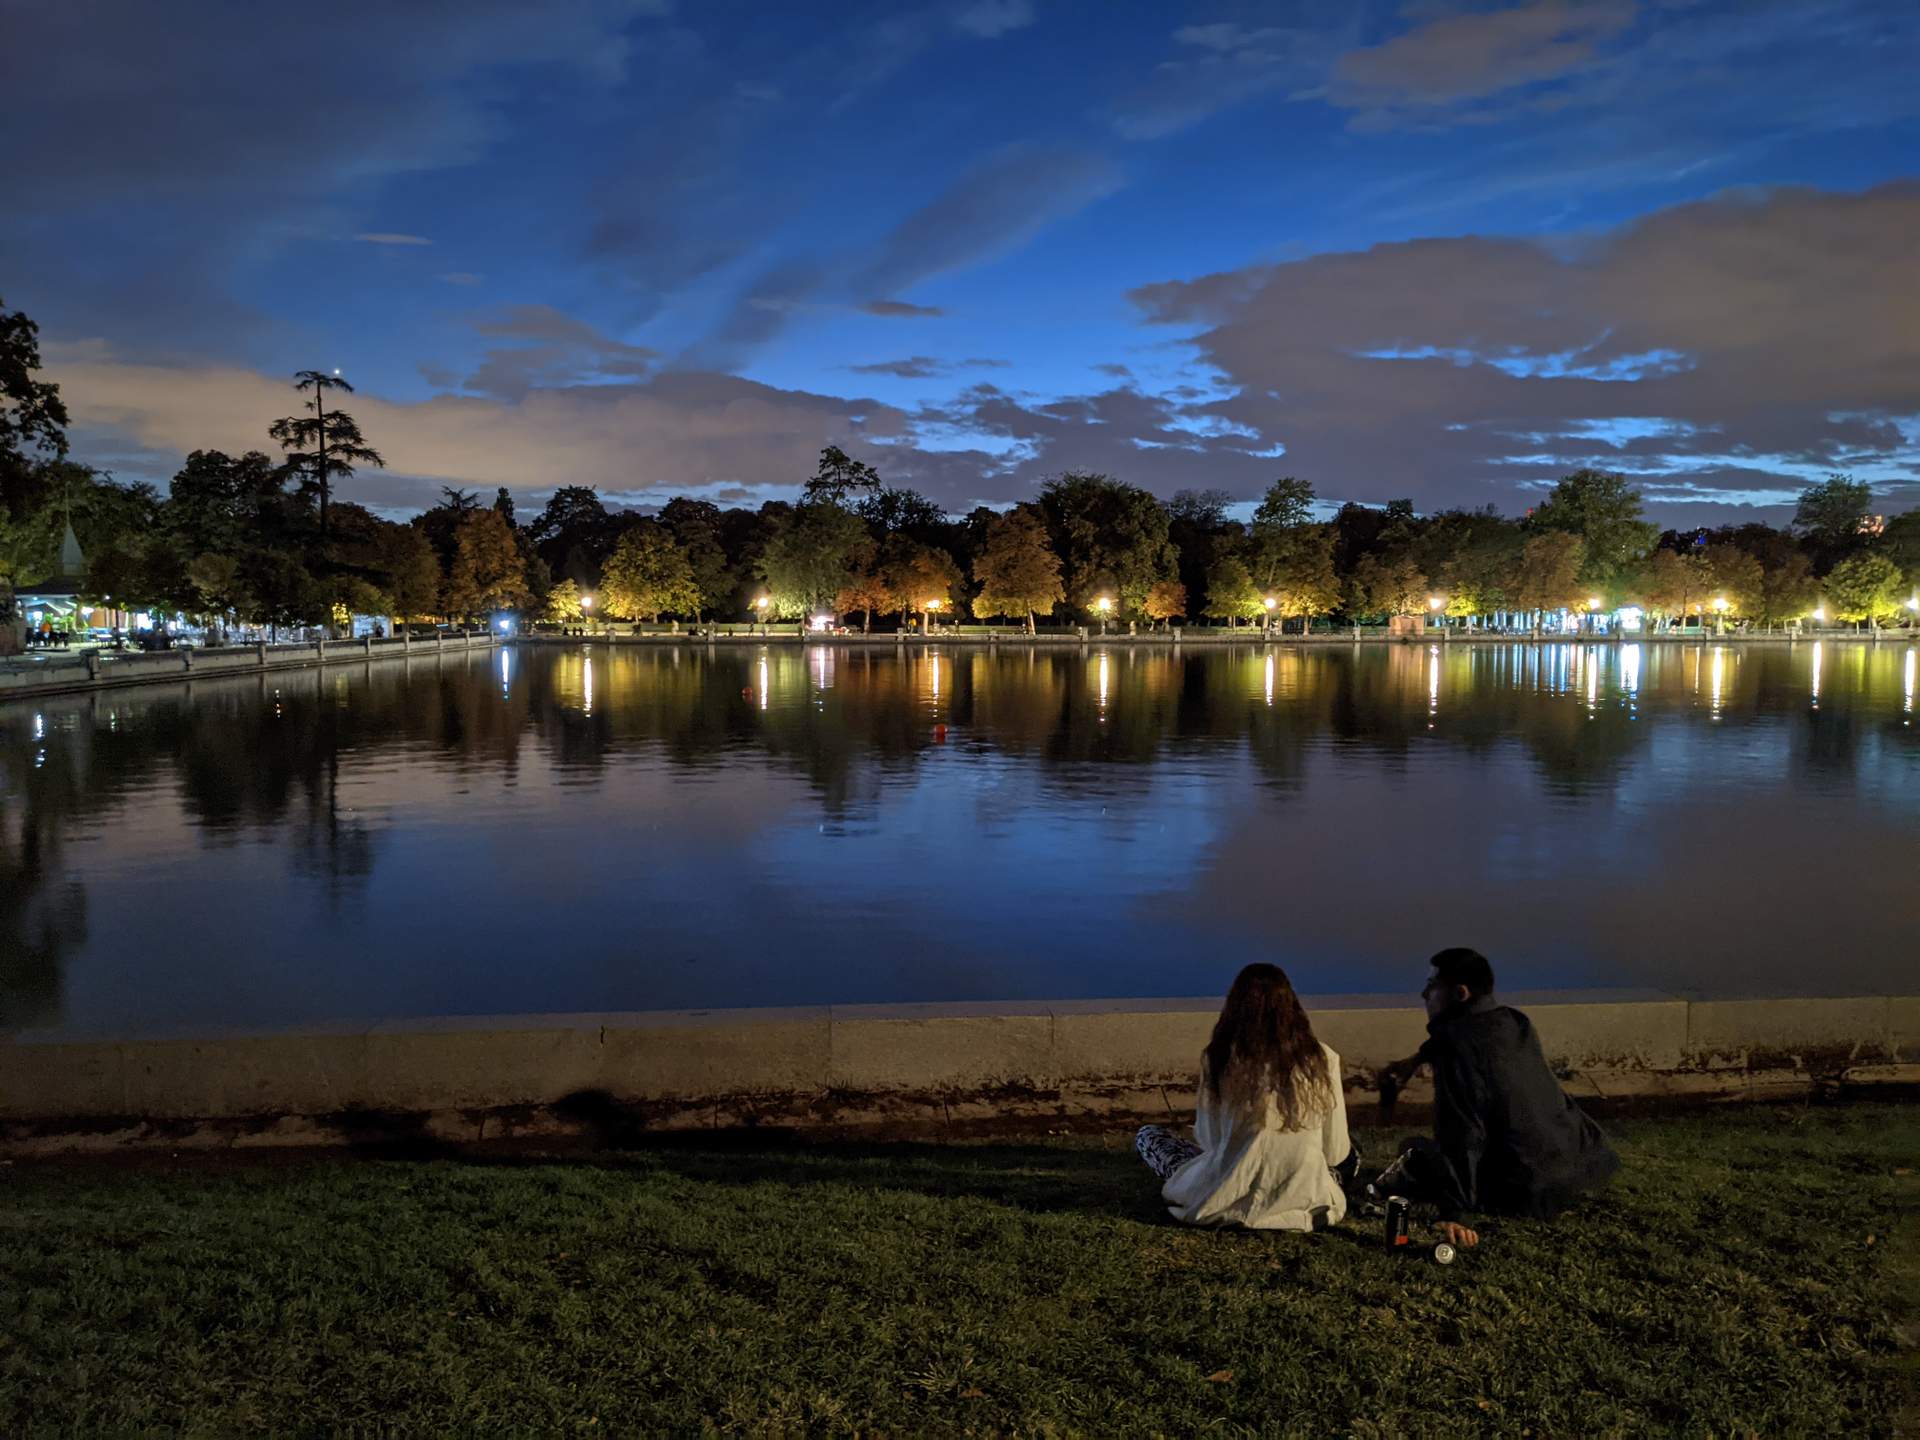 A girl and a guy sitting alone in front of the lake at Parque del Retiro in Madrid.